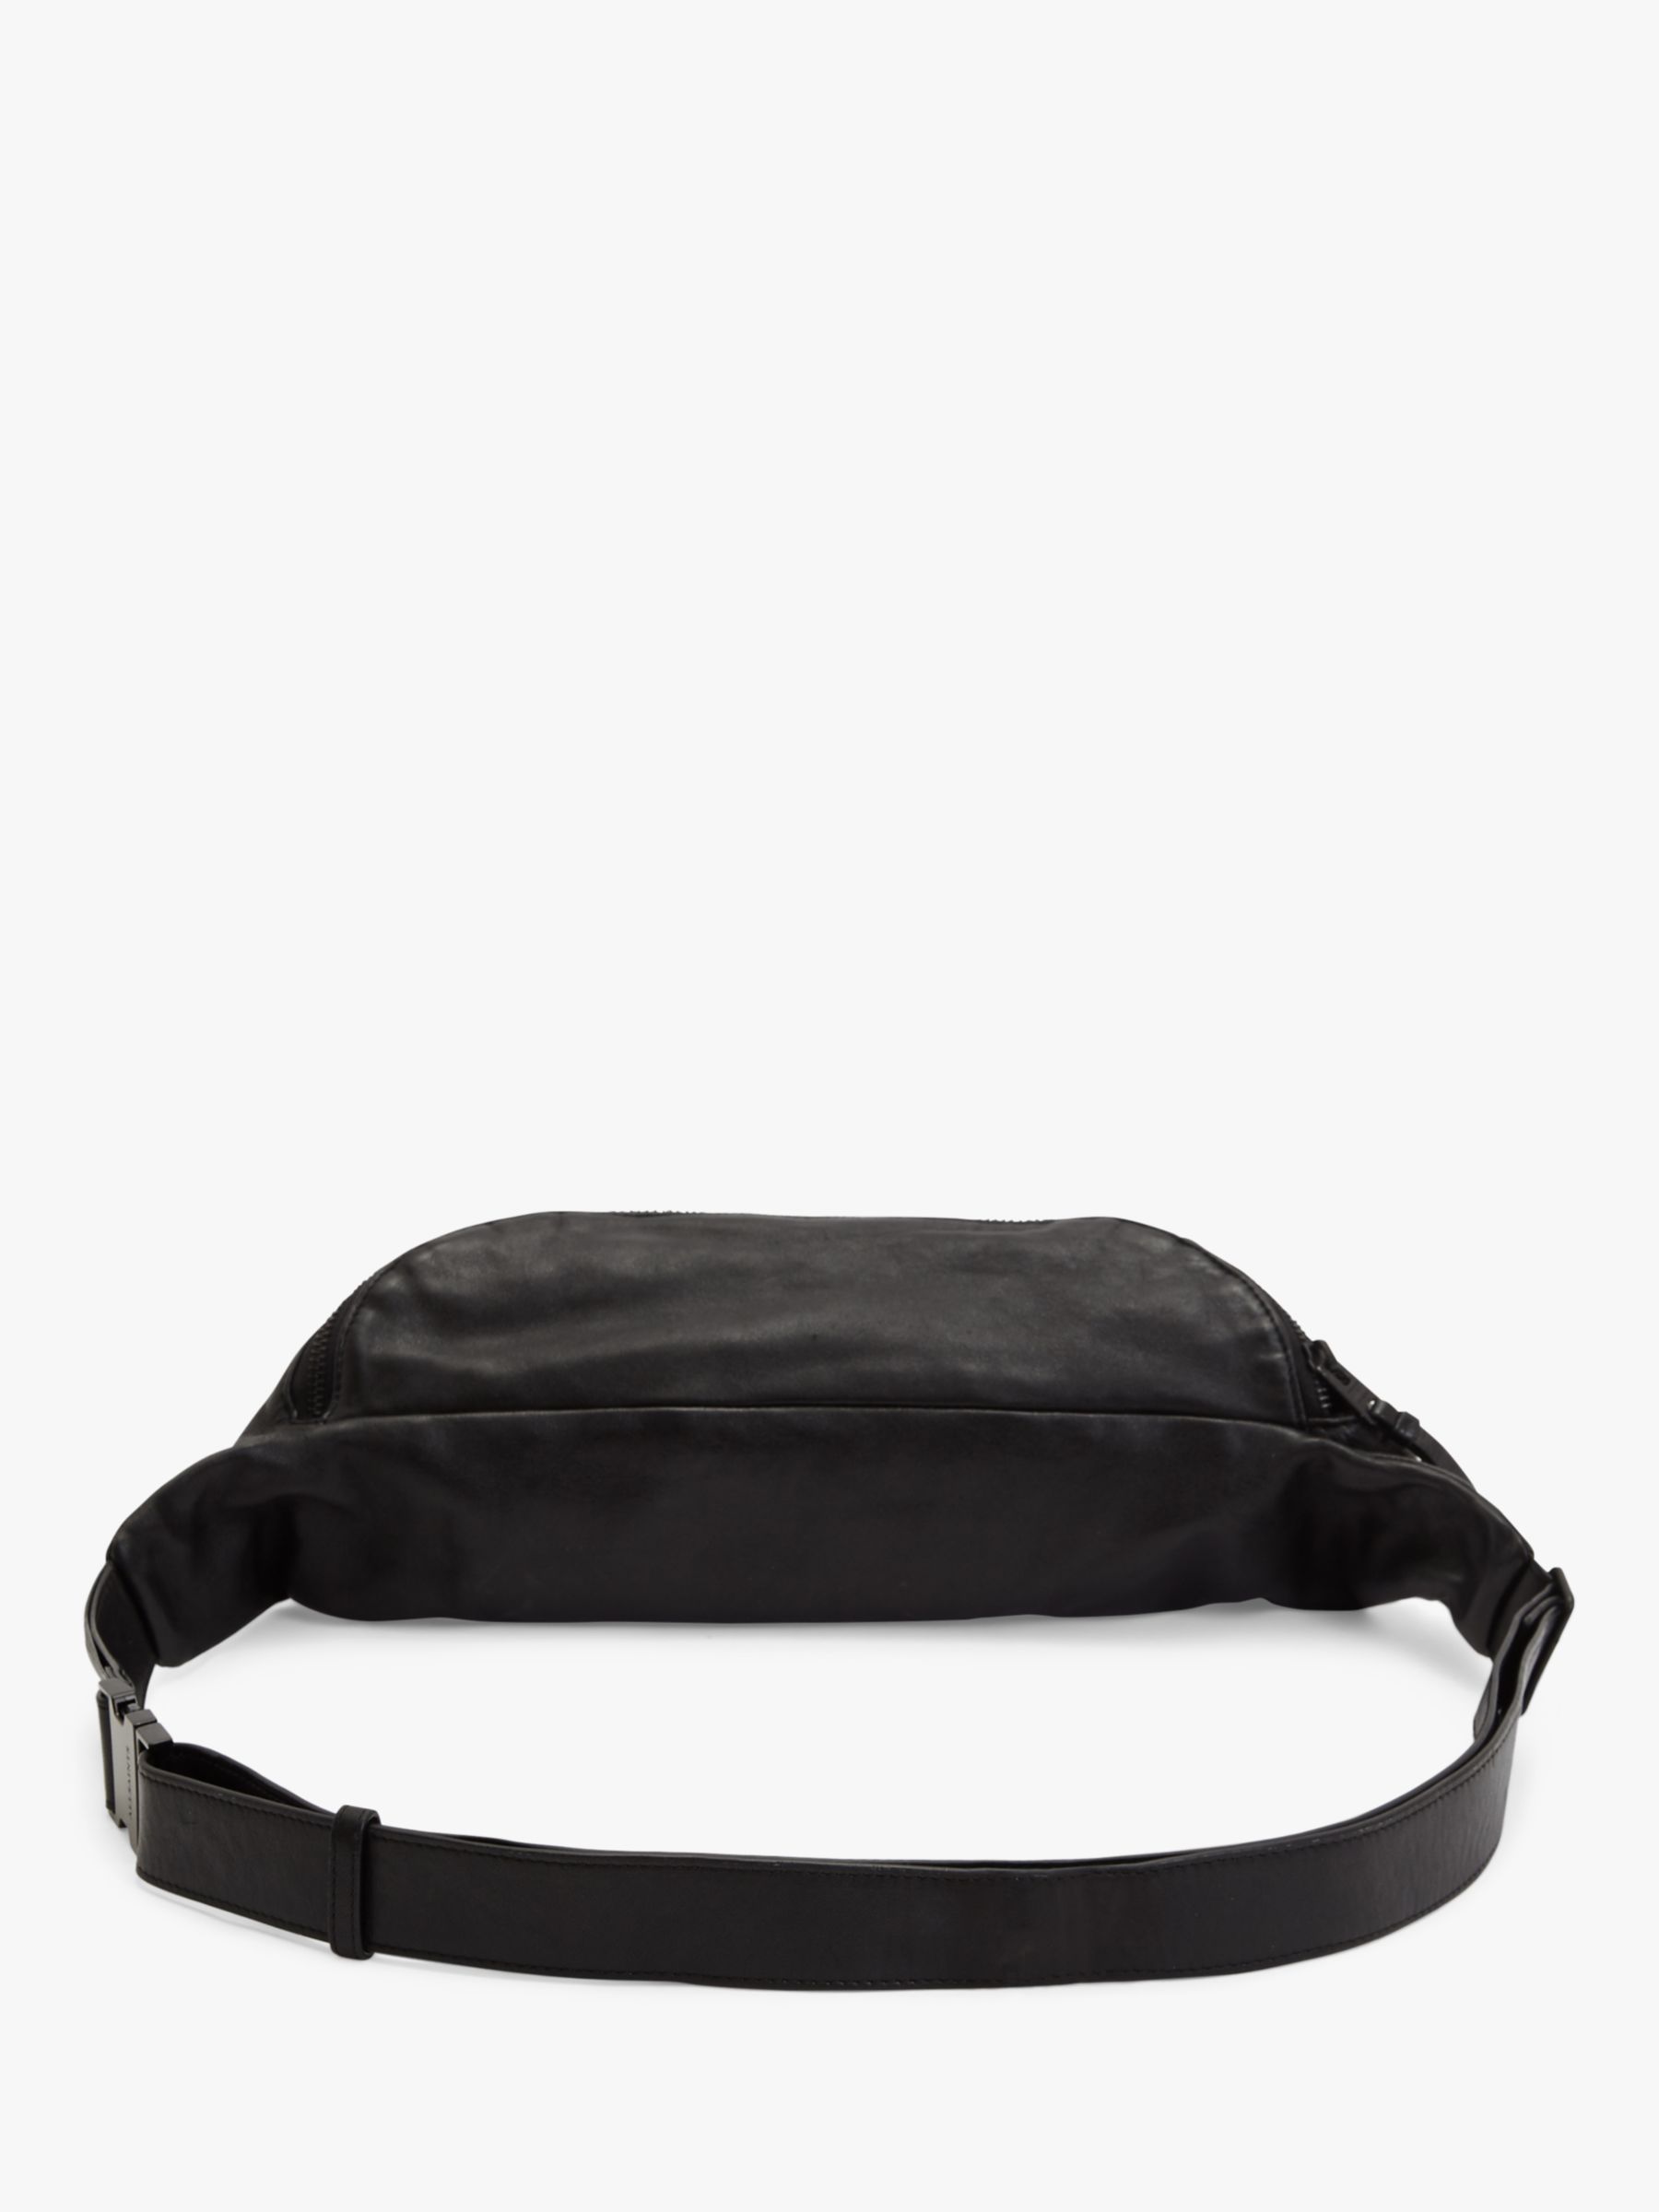 Allsaints Oppose Leather Bum Bag, Black, One Size